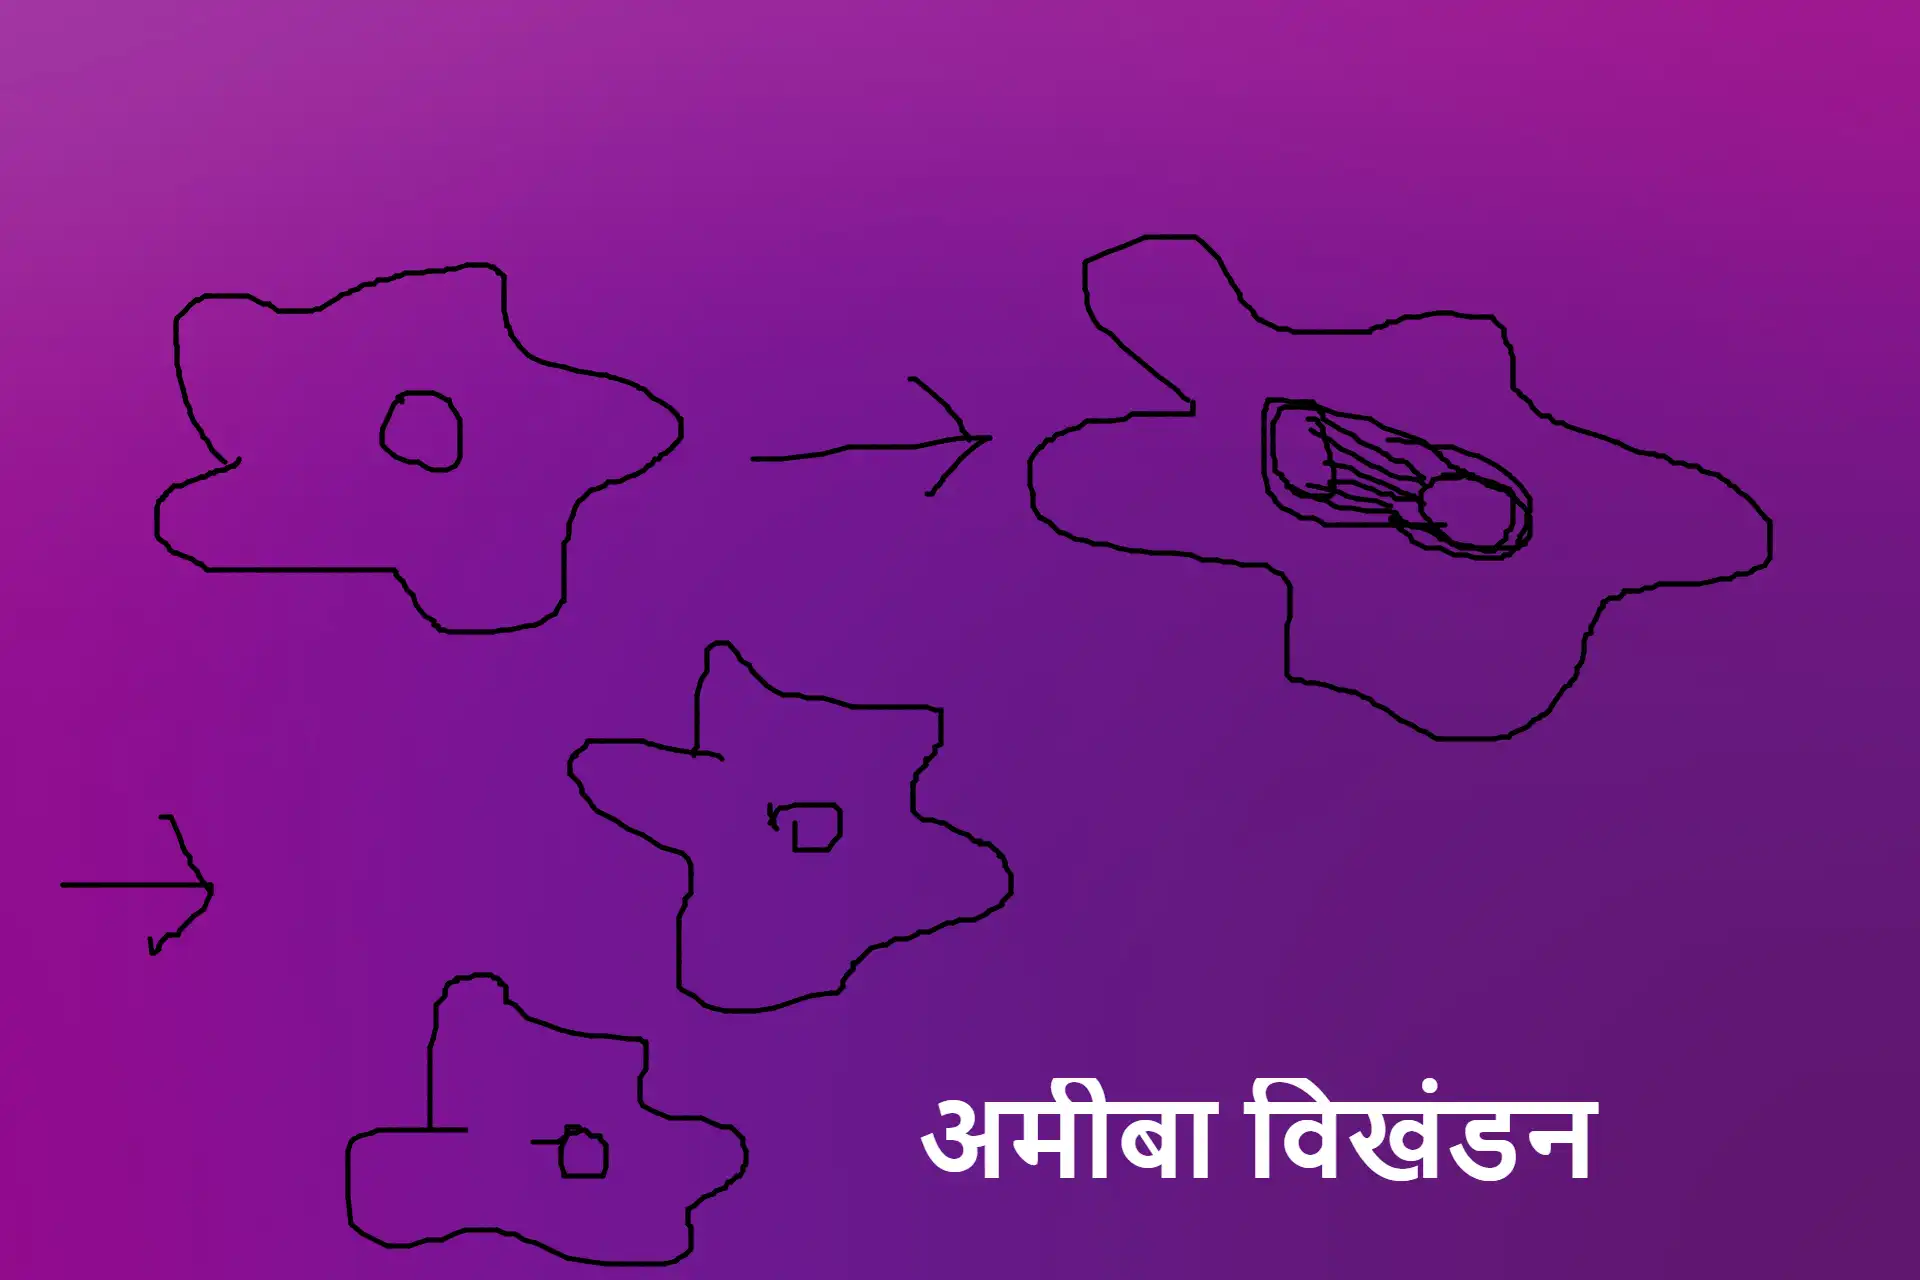 Asexual reproduction in hindi